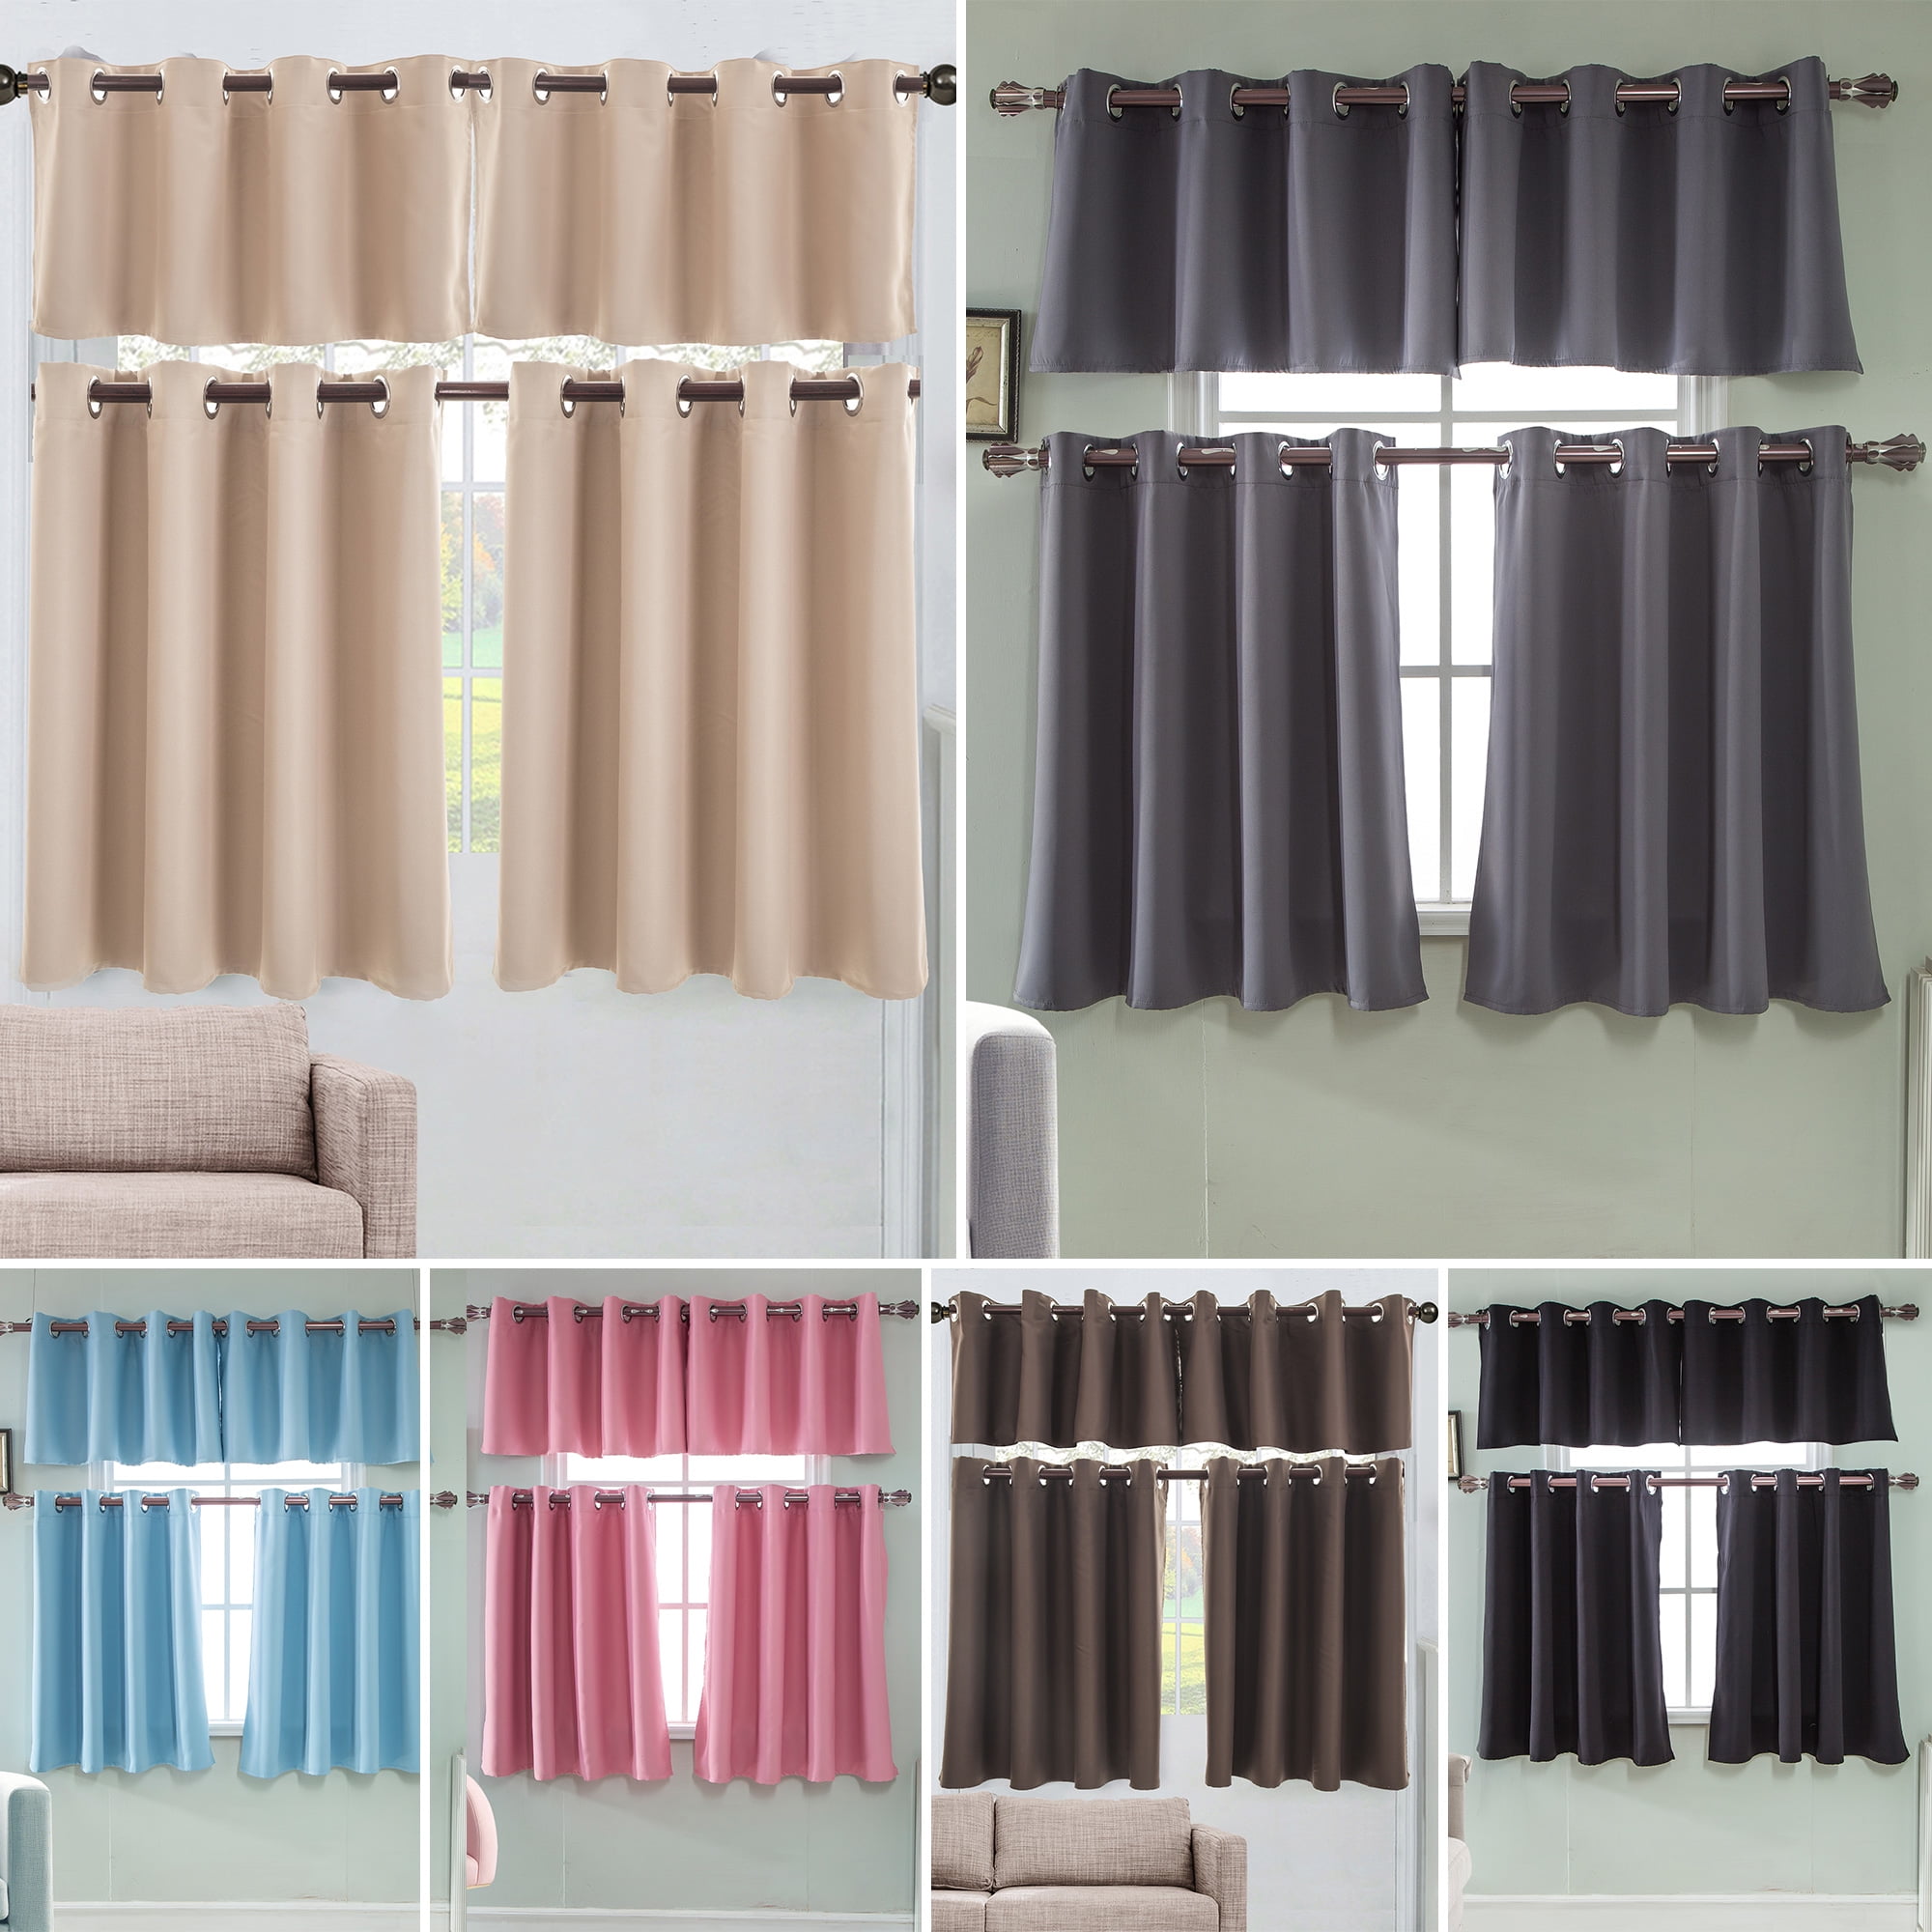 Solid Blackout Short Curtains Cafe Kitchen Window Curtain Panels Half